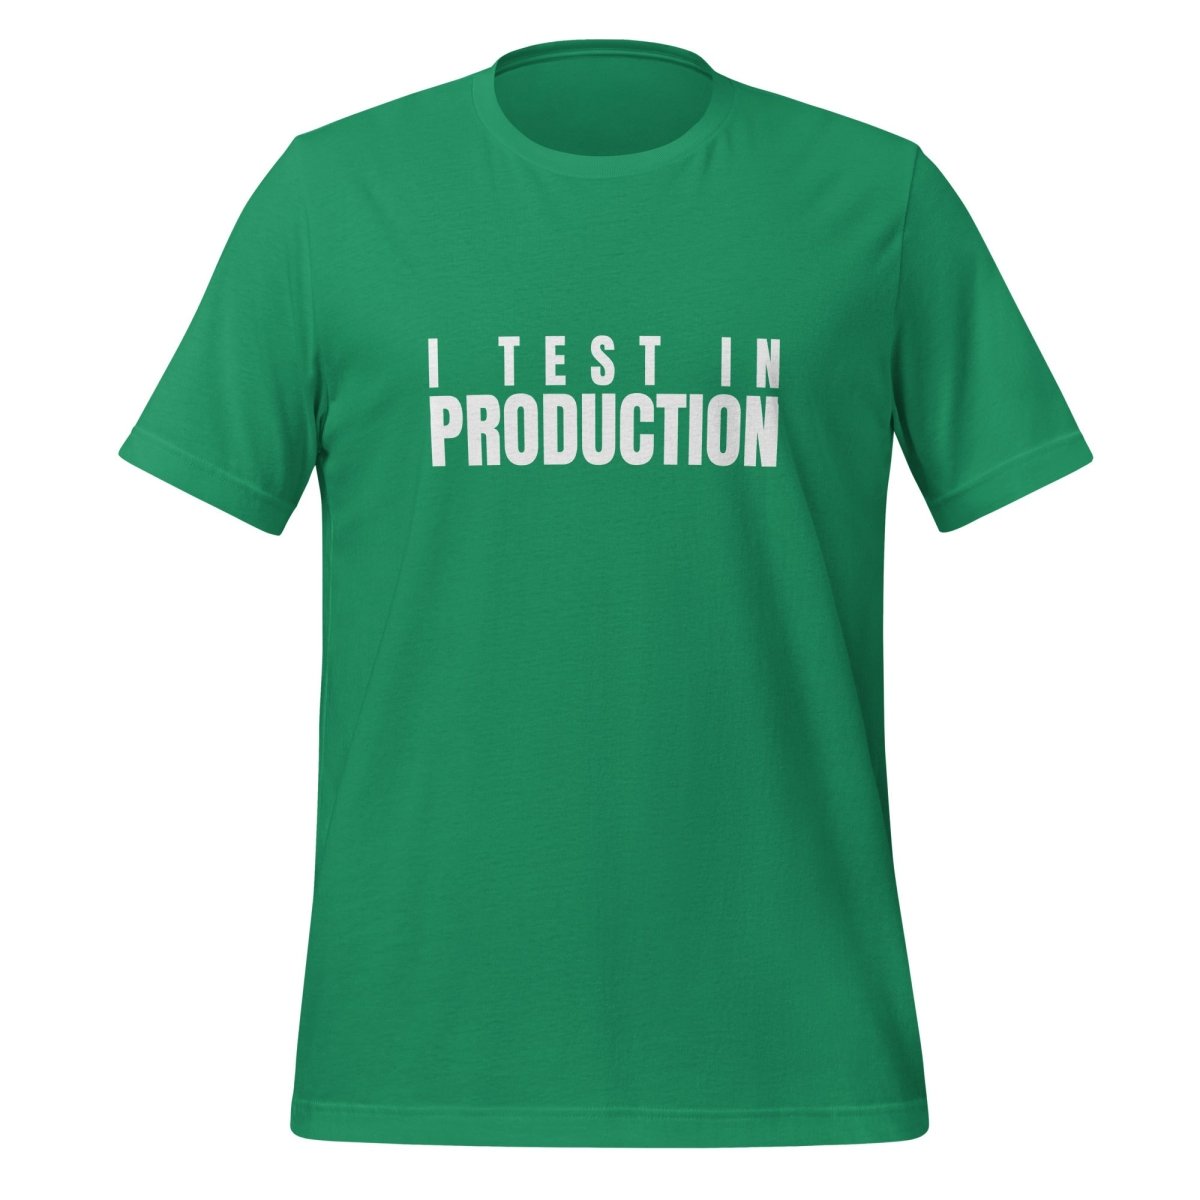 I Test in Production T - Shirt (unisex) - Kelly - AI Store